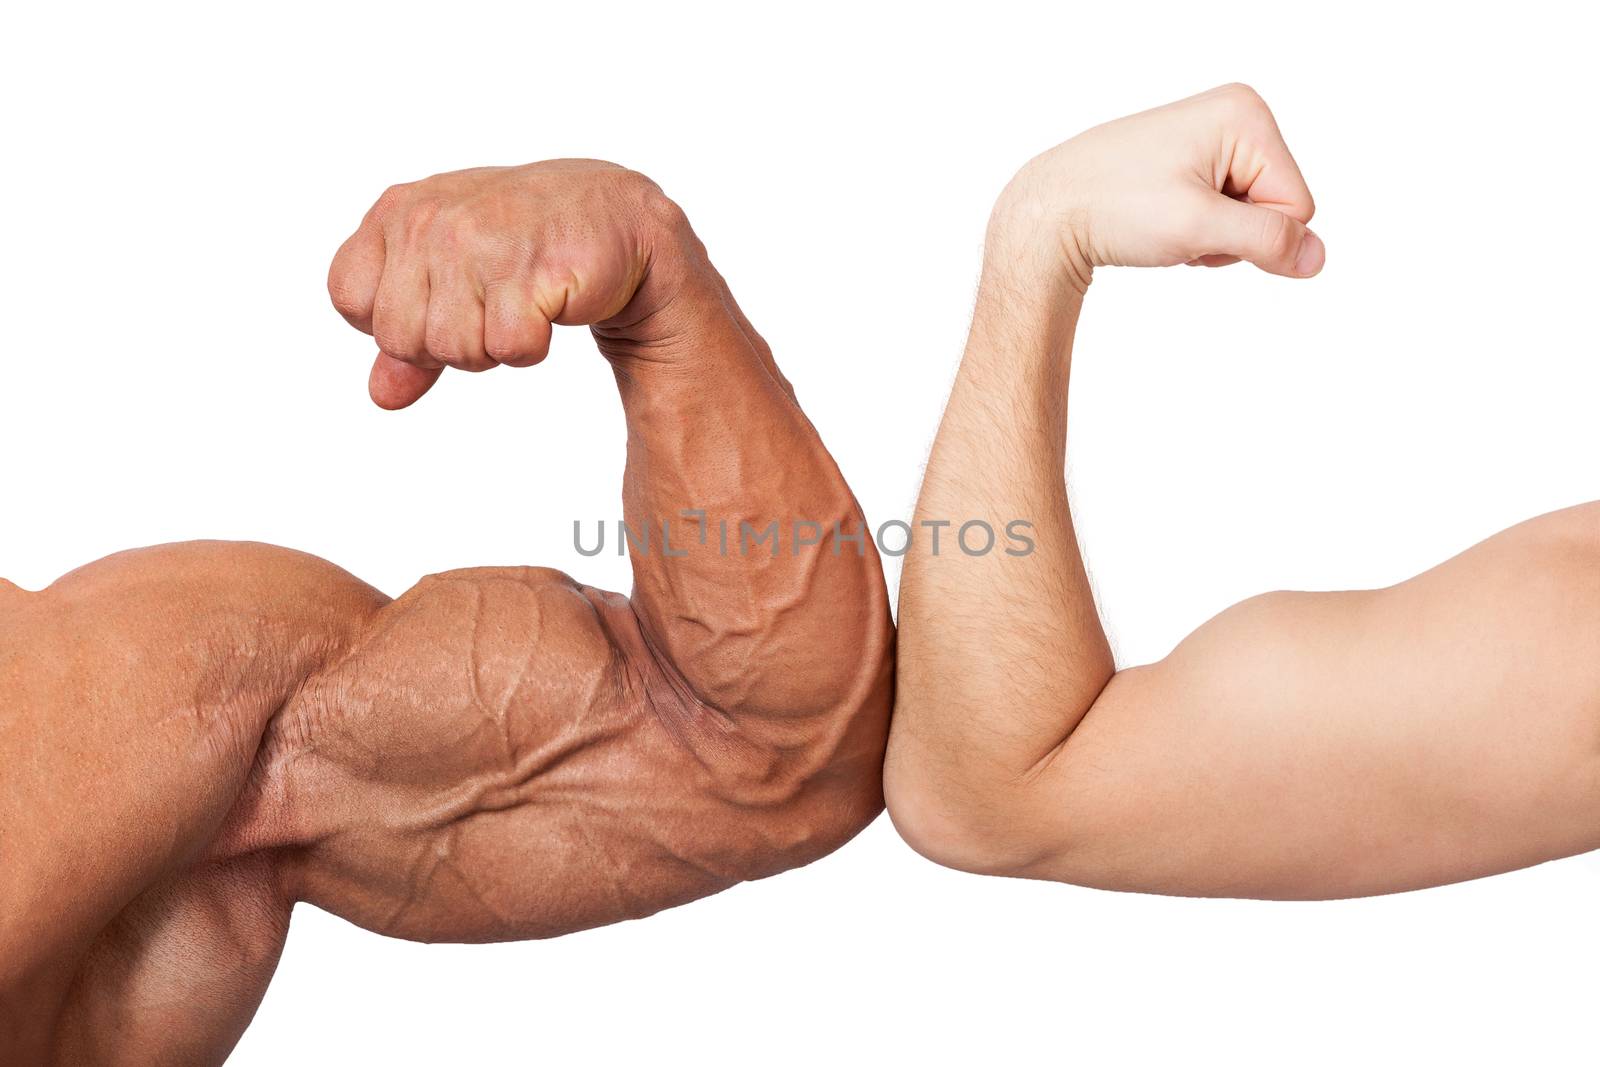 Bodybuilder and normal biceps isolated on white background. Bodybuilding, sports and fitness concept.